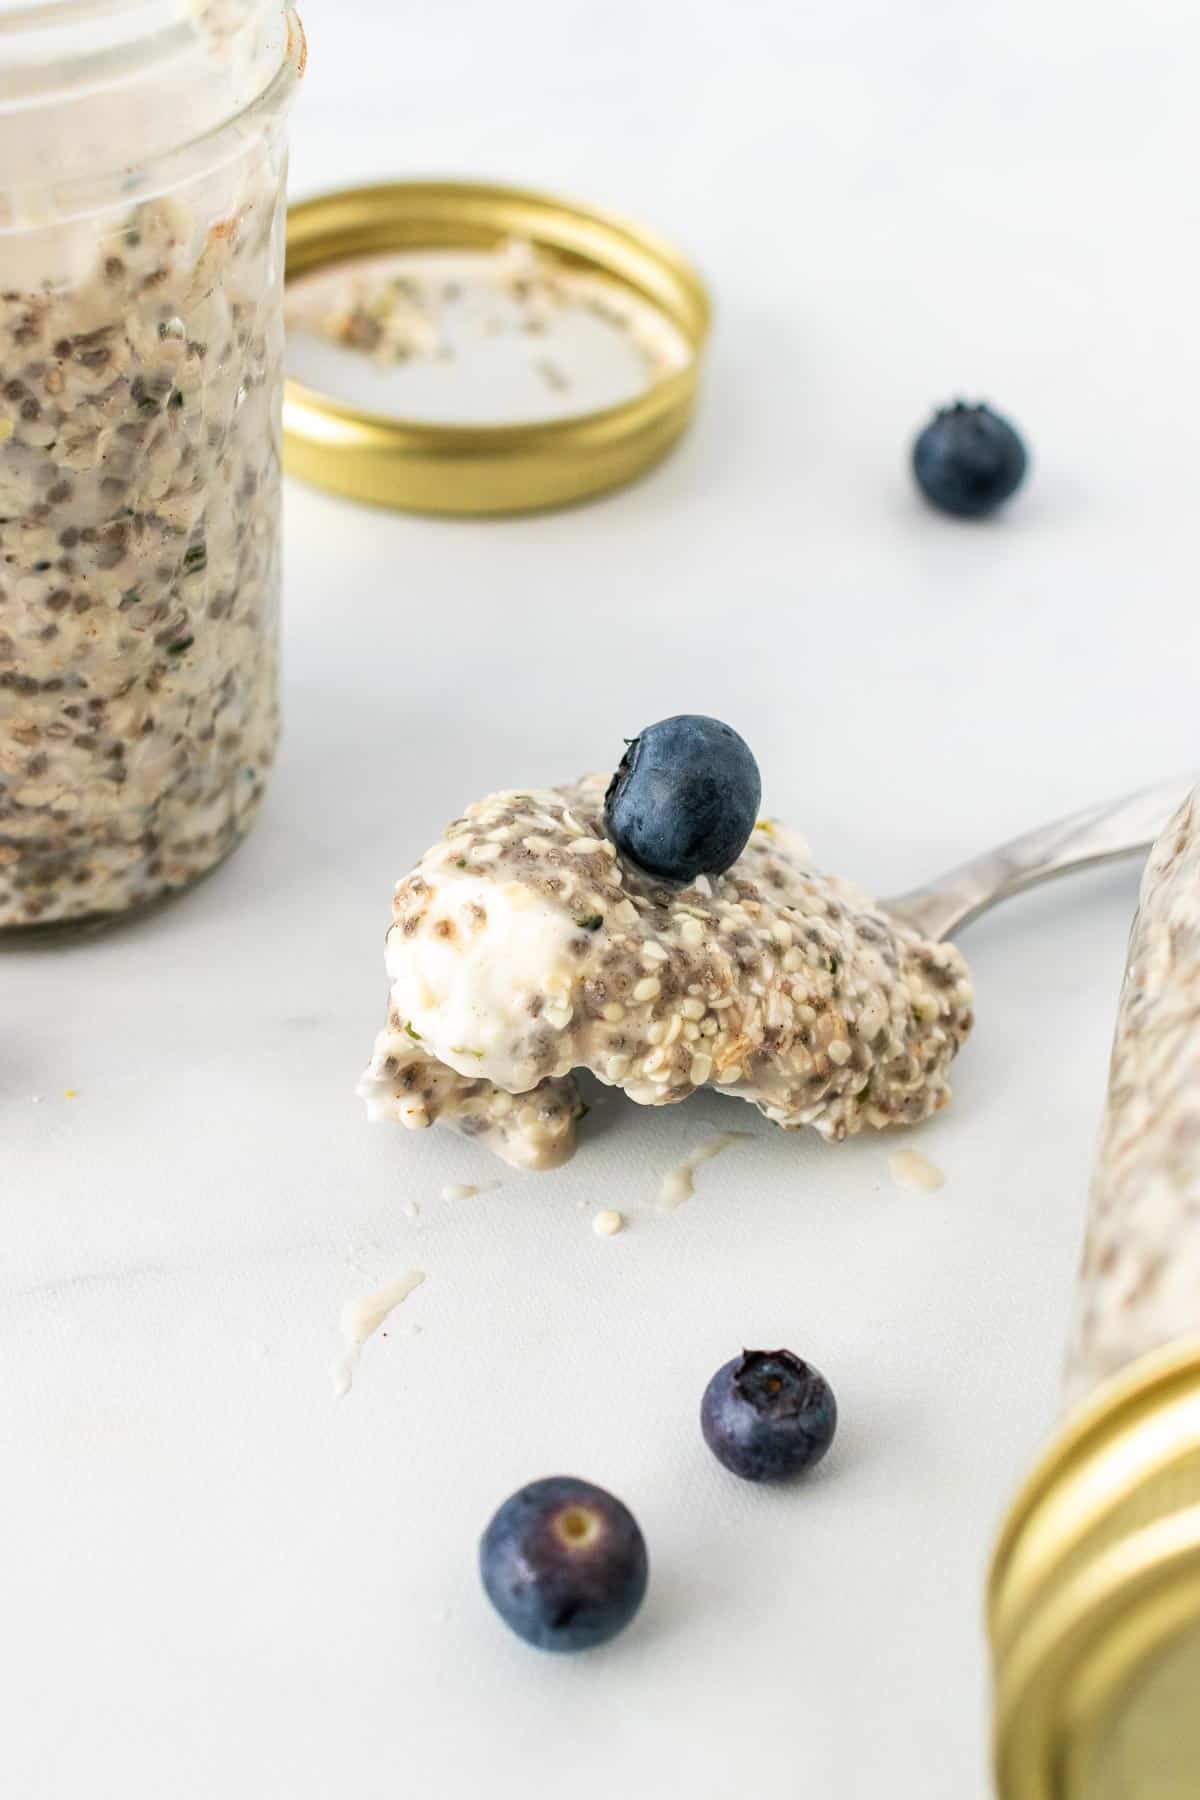 A spoonful of overnight faux oats with a blue berry on top next to an open jar of faux oats